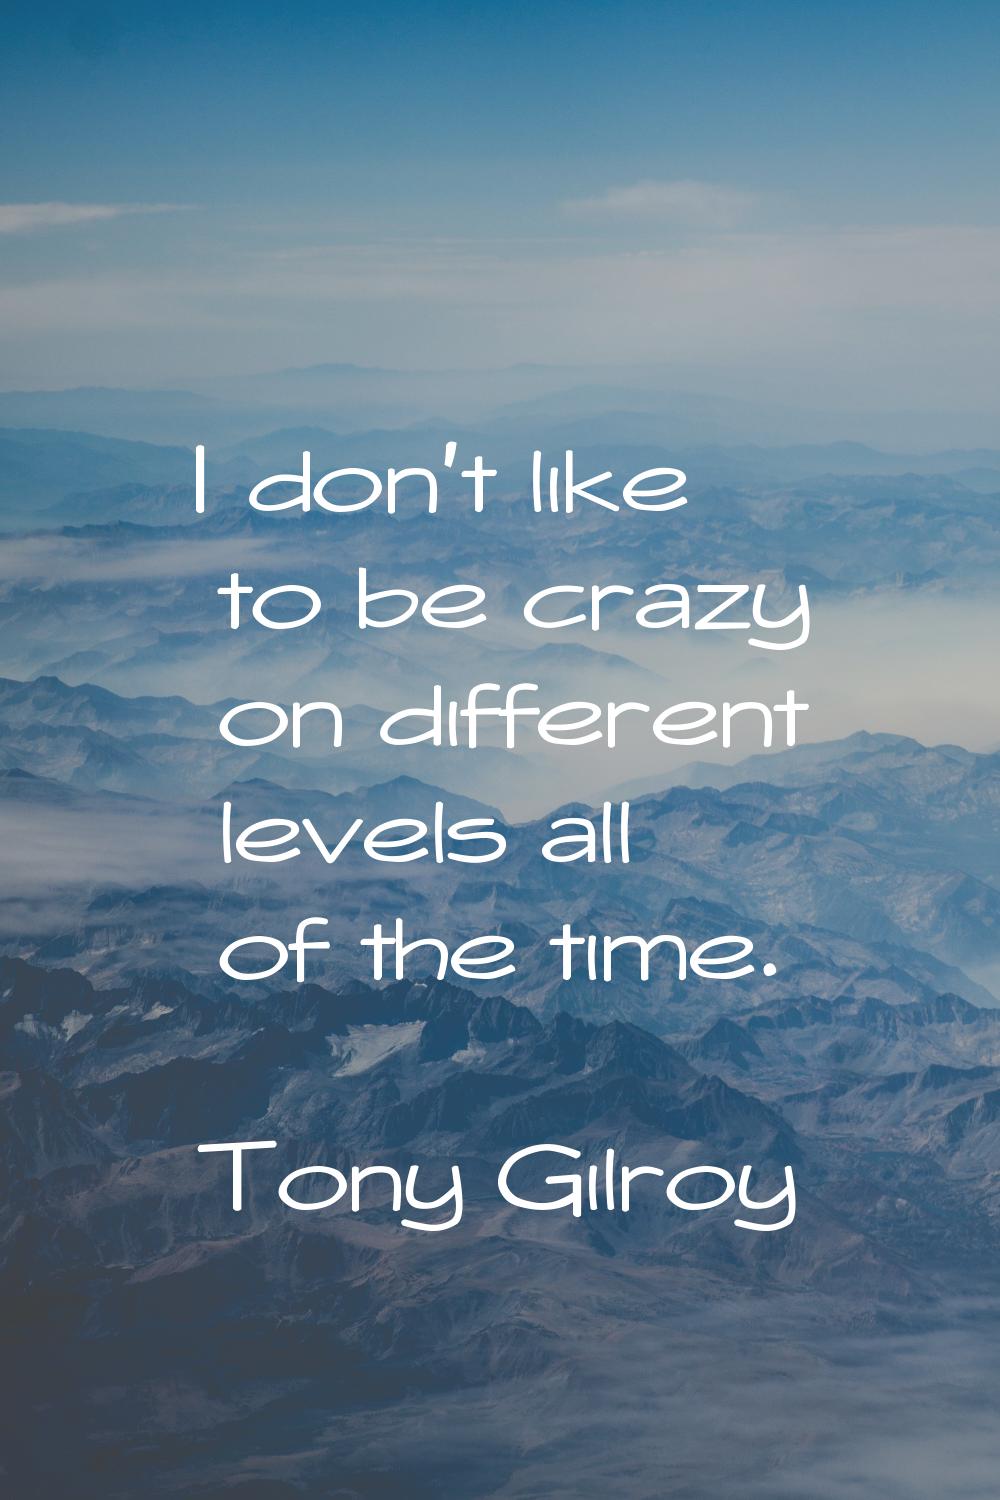 I don't like to be crazy on different levels all of the time.